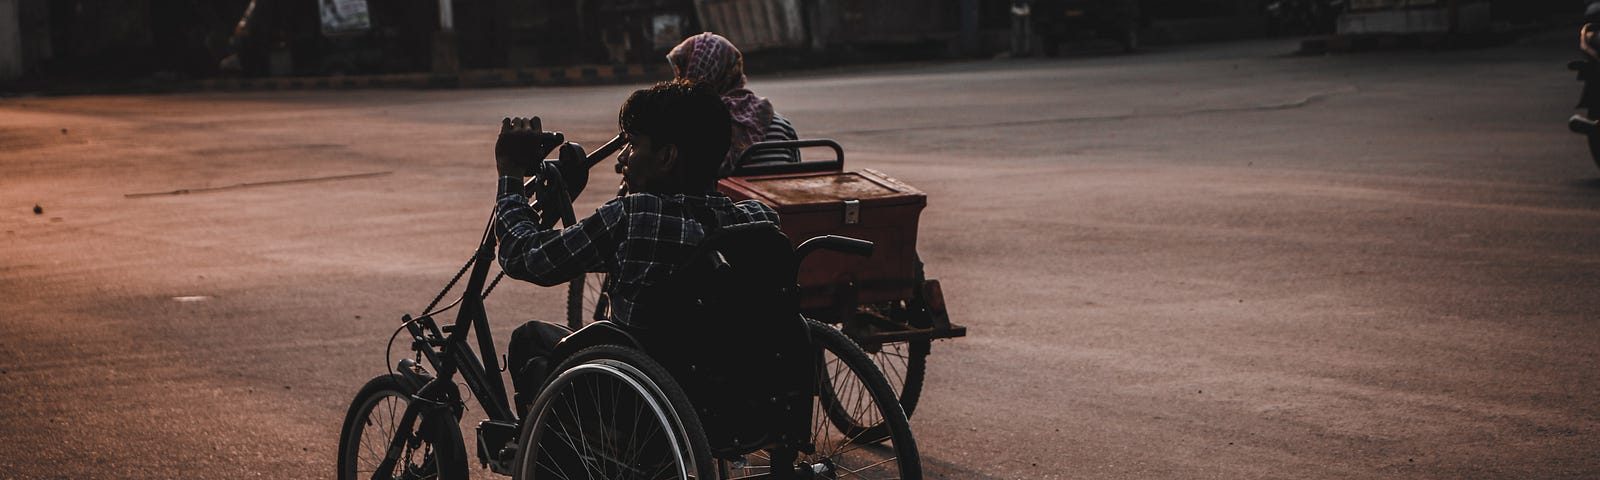 A disabled poor, south asian person going somewhere in  a handicapped tricycle.